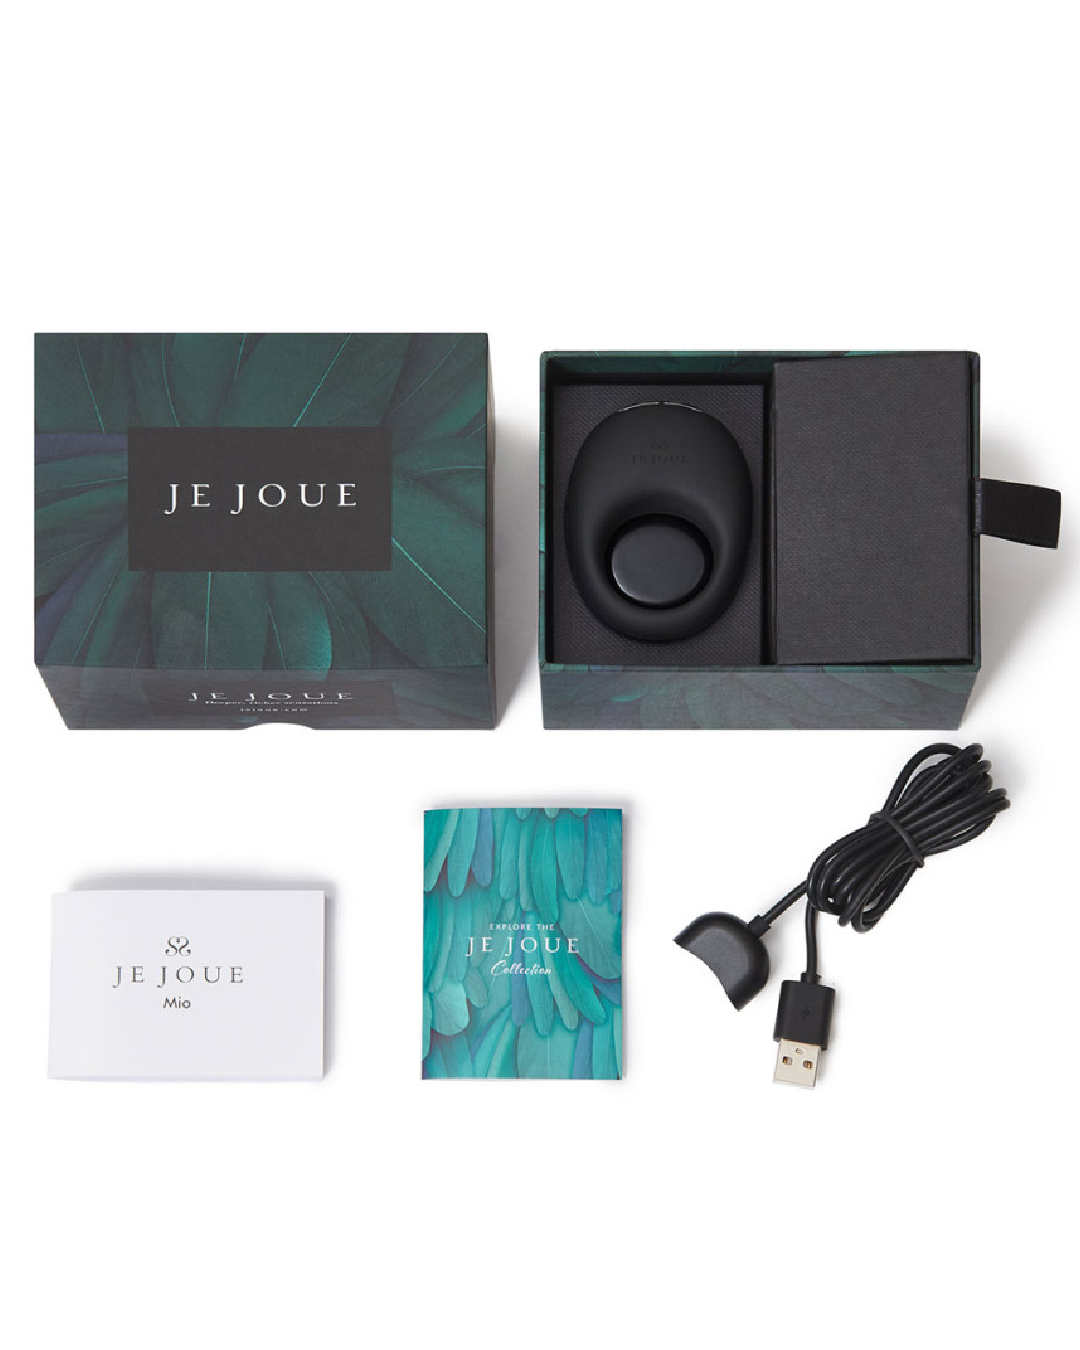 Je Joue Mio Vibrating Cock Ring - Black  box and contents